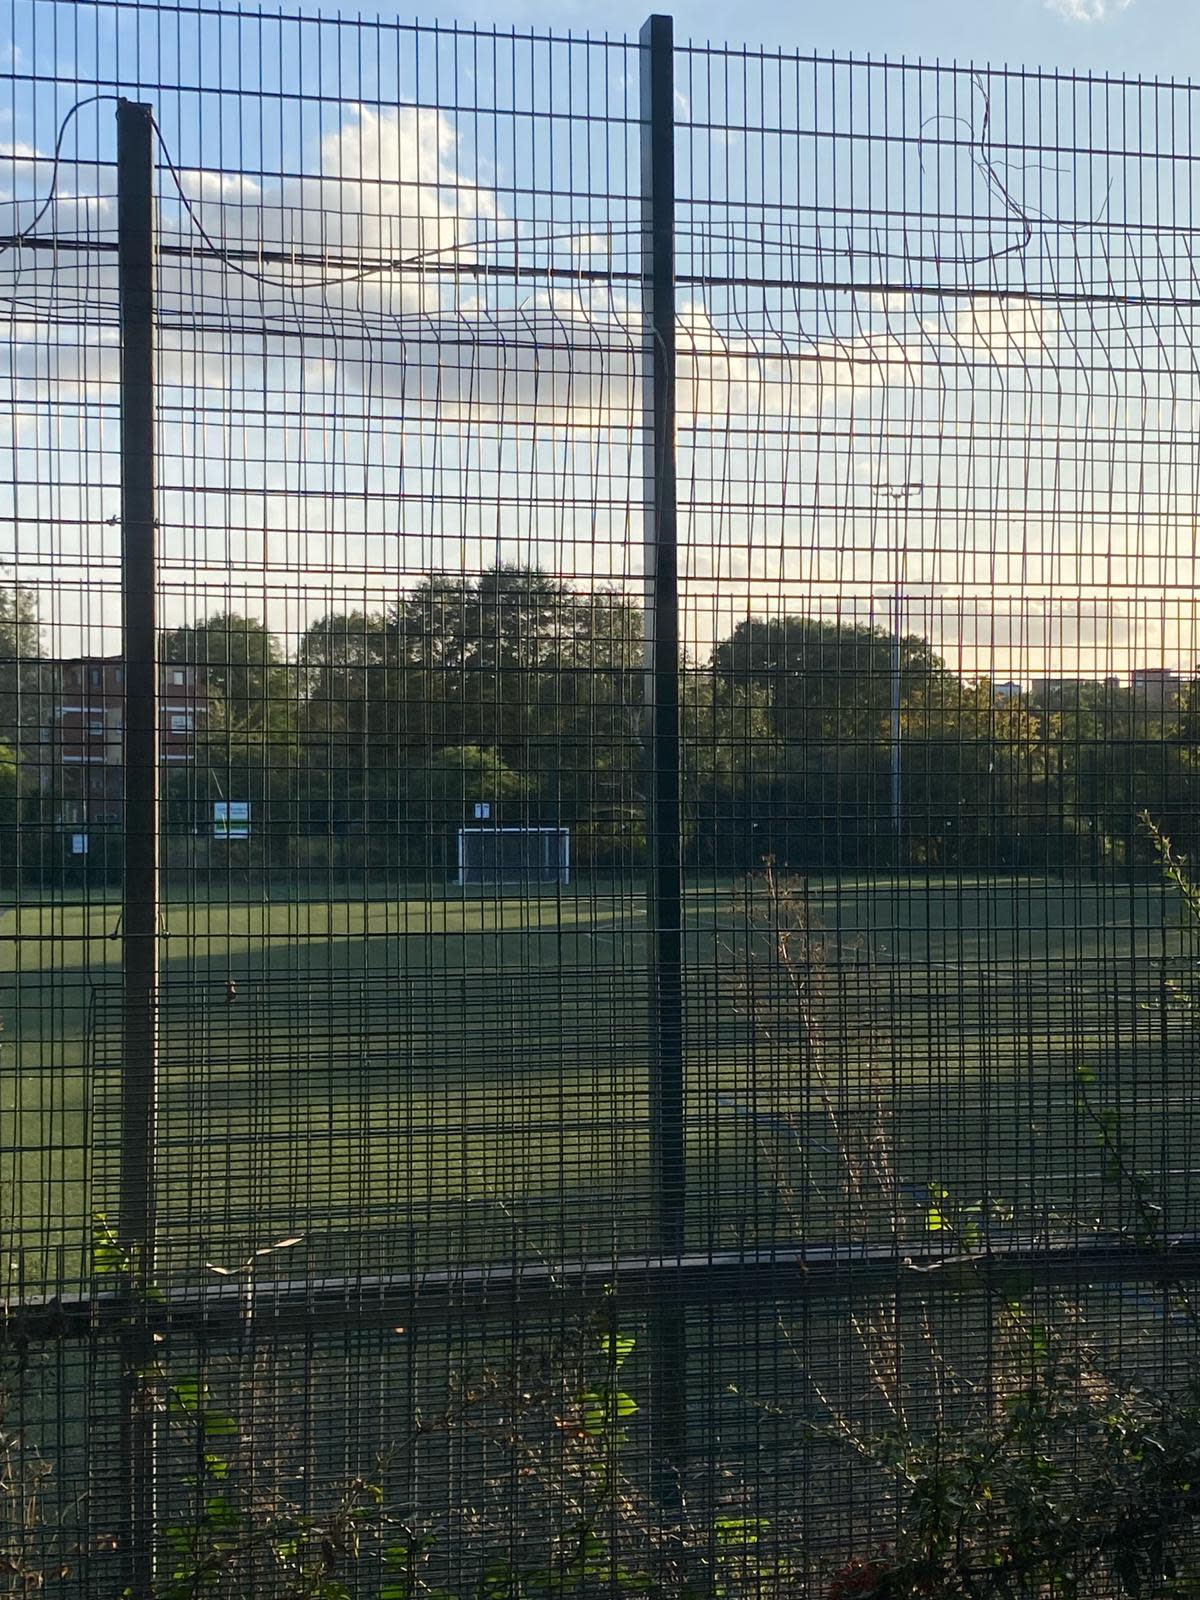 Girls were left without a football pitch to train in after they turned up to training at Stepney Green Astro to discover they had been replaced by a boys group (David Drewett)